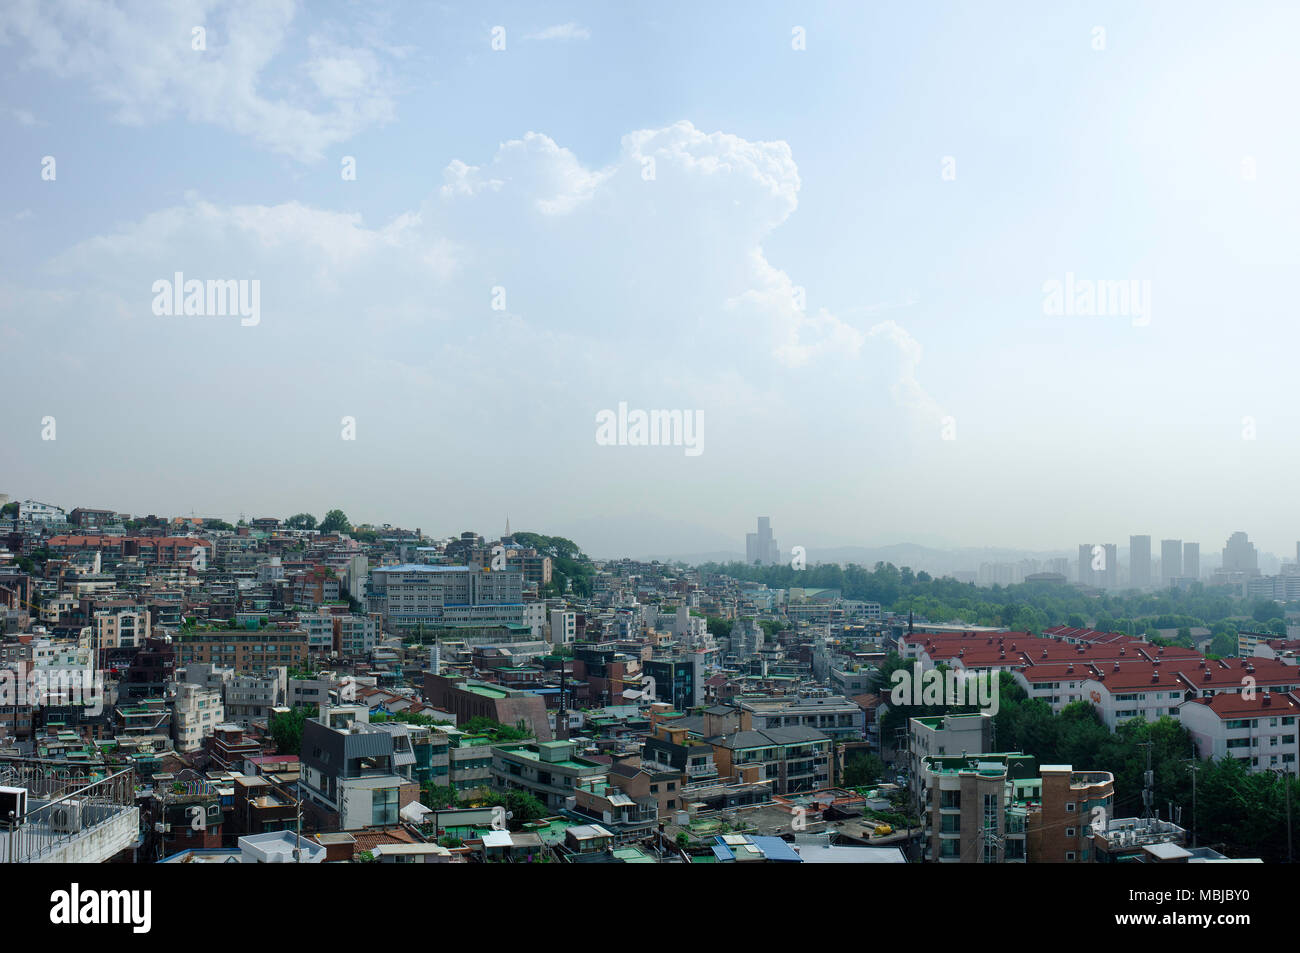 A view of the Yongsan district of Seoul, South Korea in the hot, rainy summer monsoon season. Stock Photo